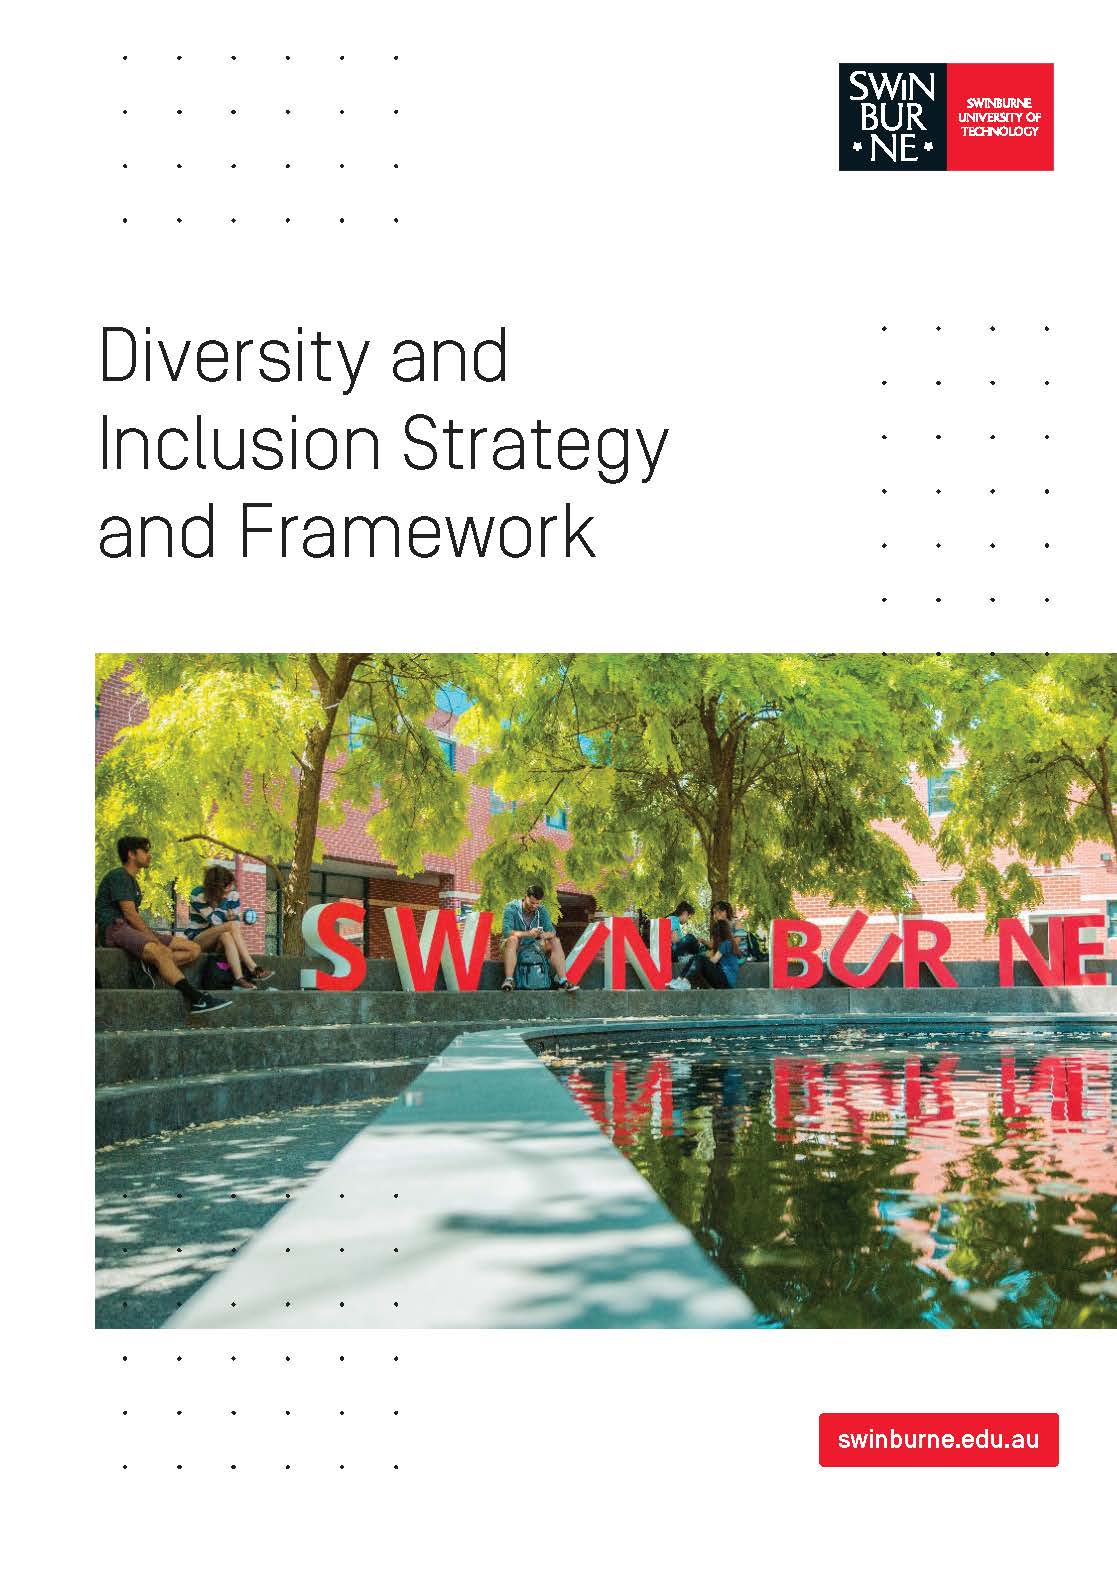 Diversity & Inclusion Strategy and Framework